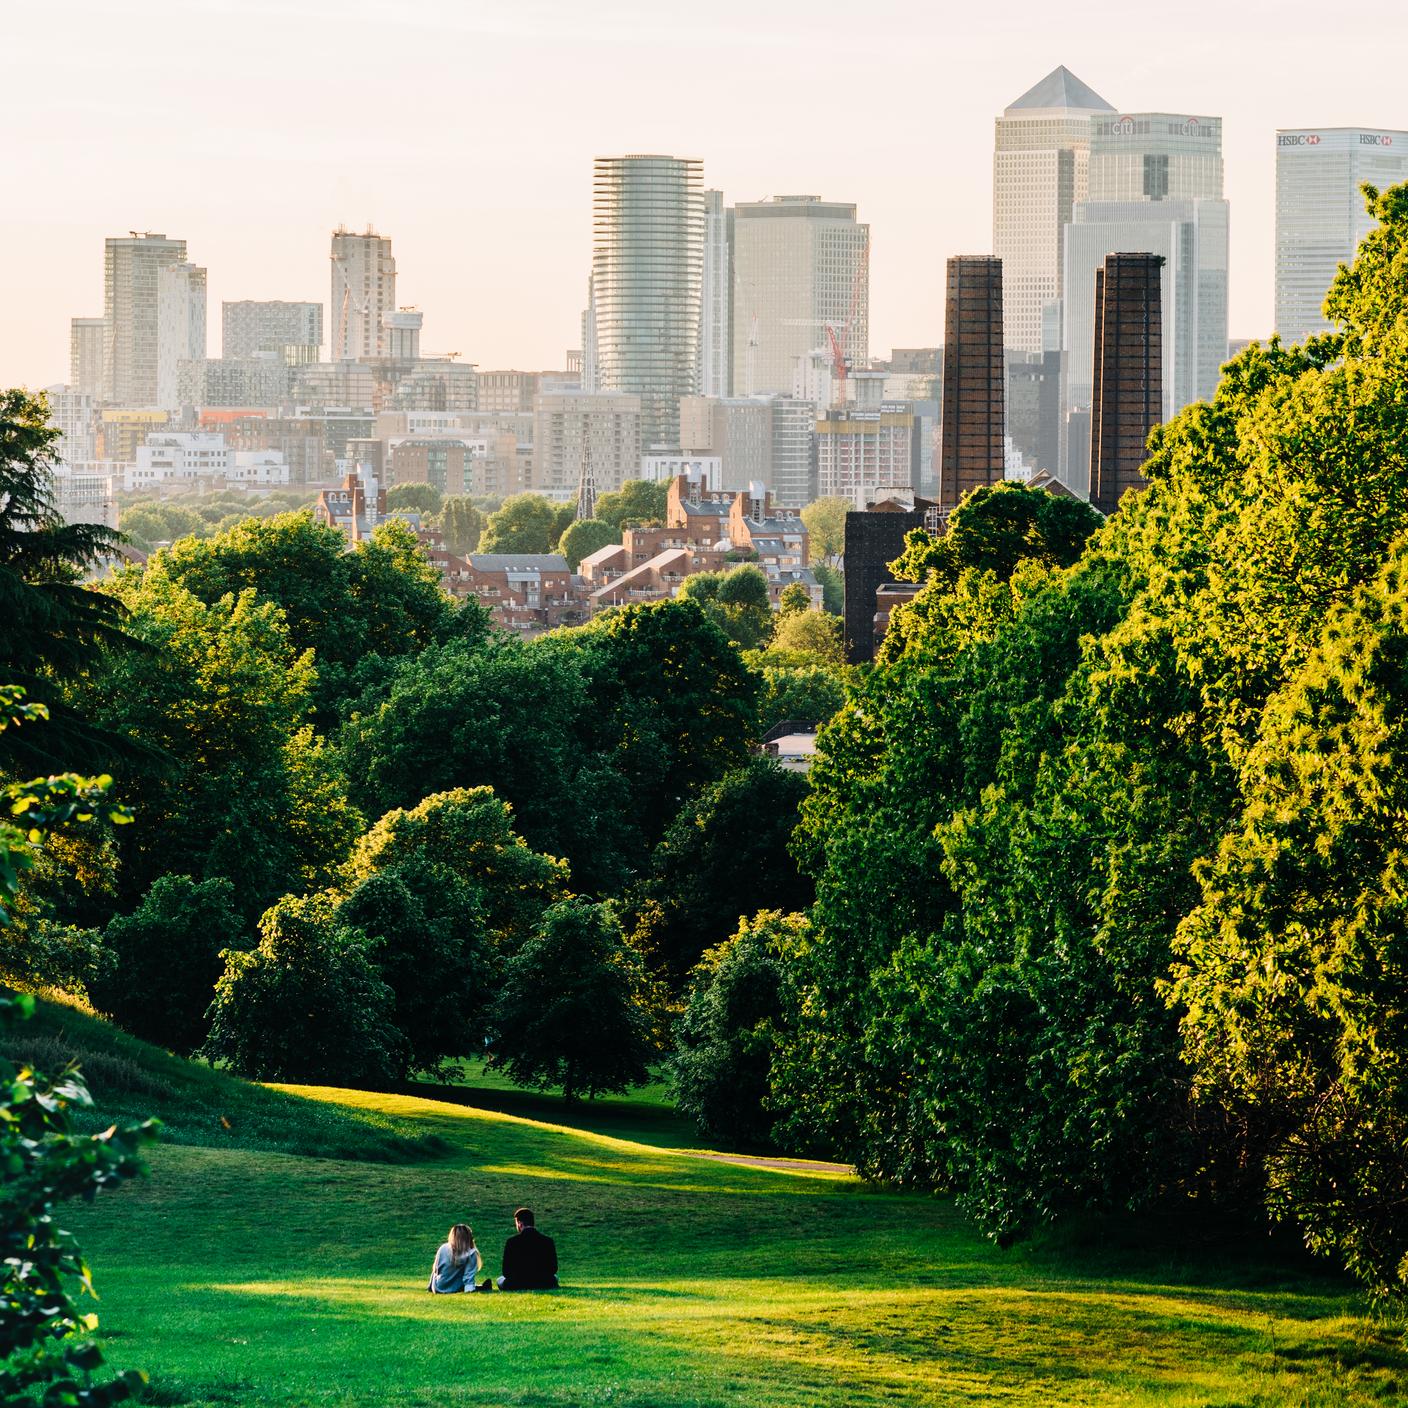 Greenwich Park, London looking the Canary Wharf skyline